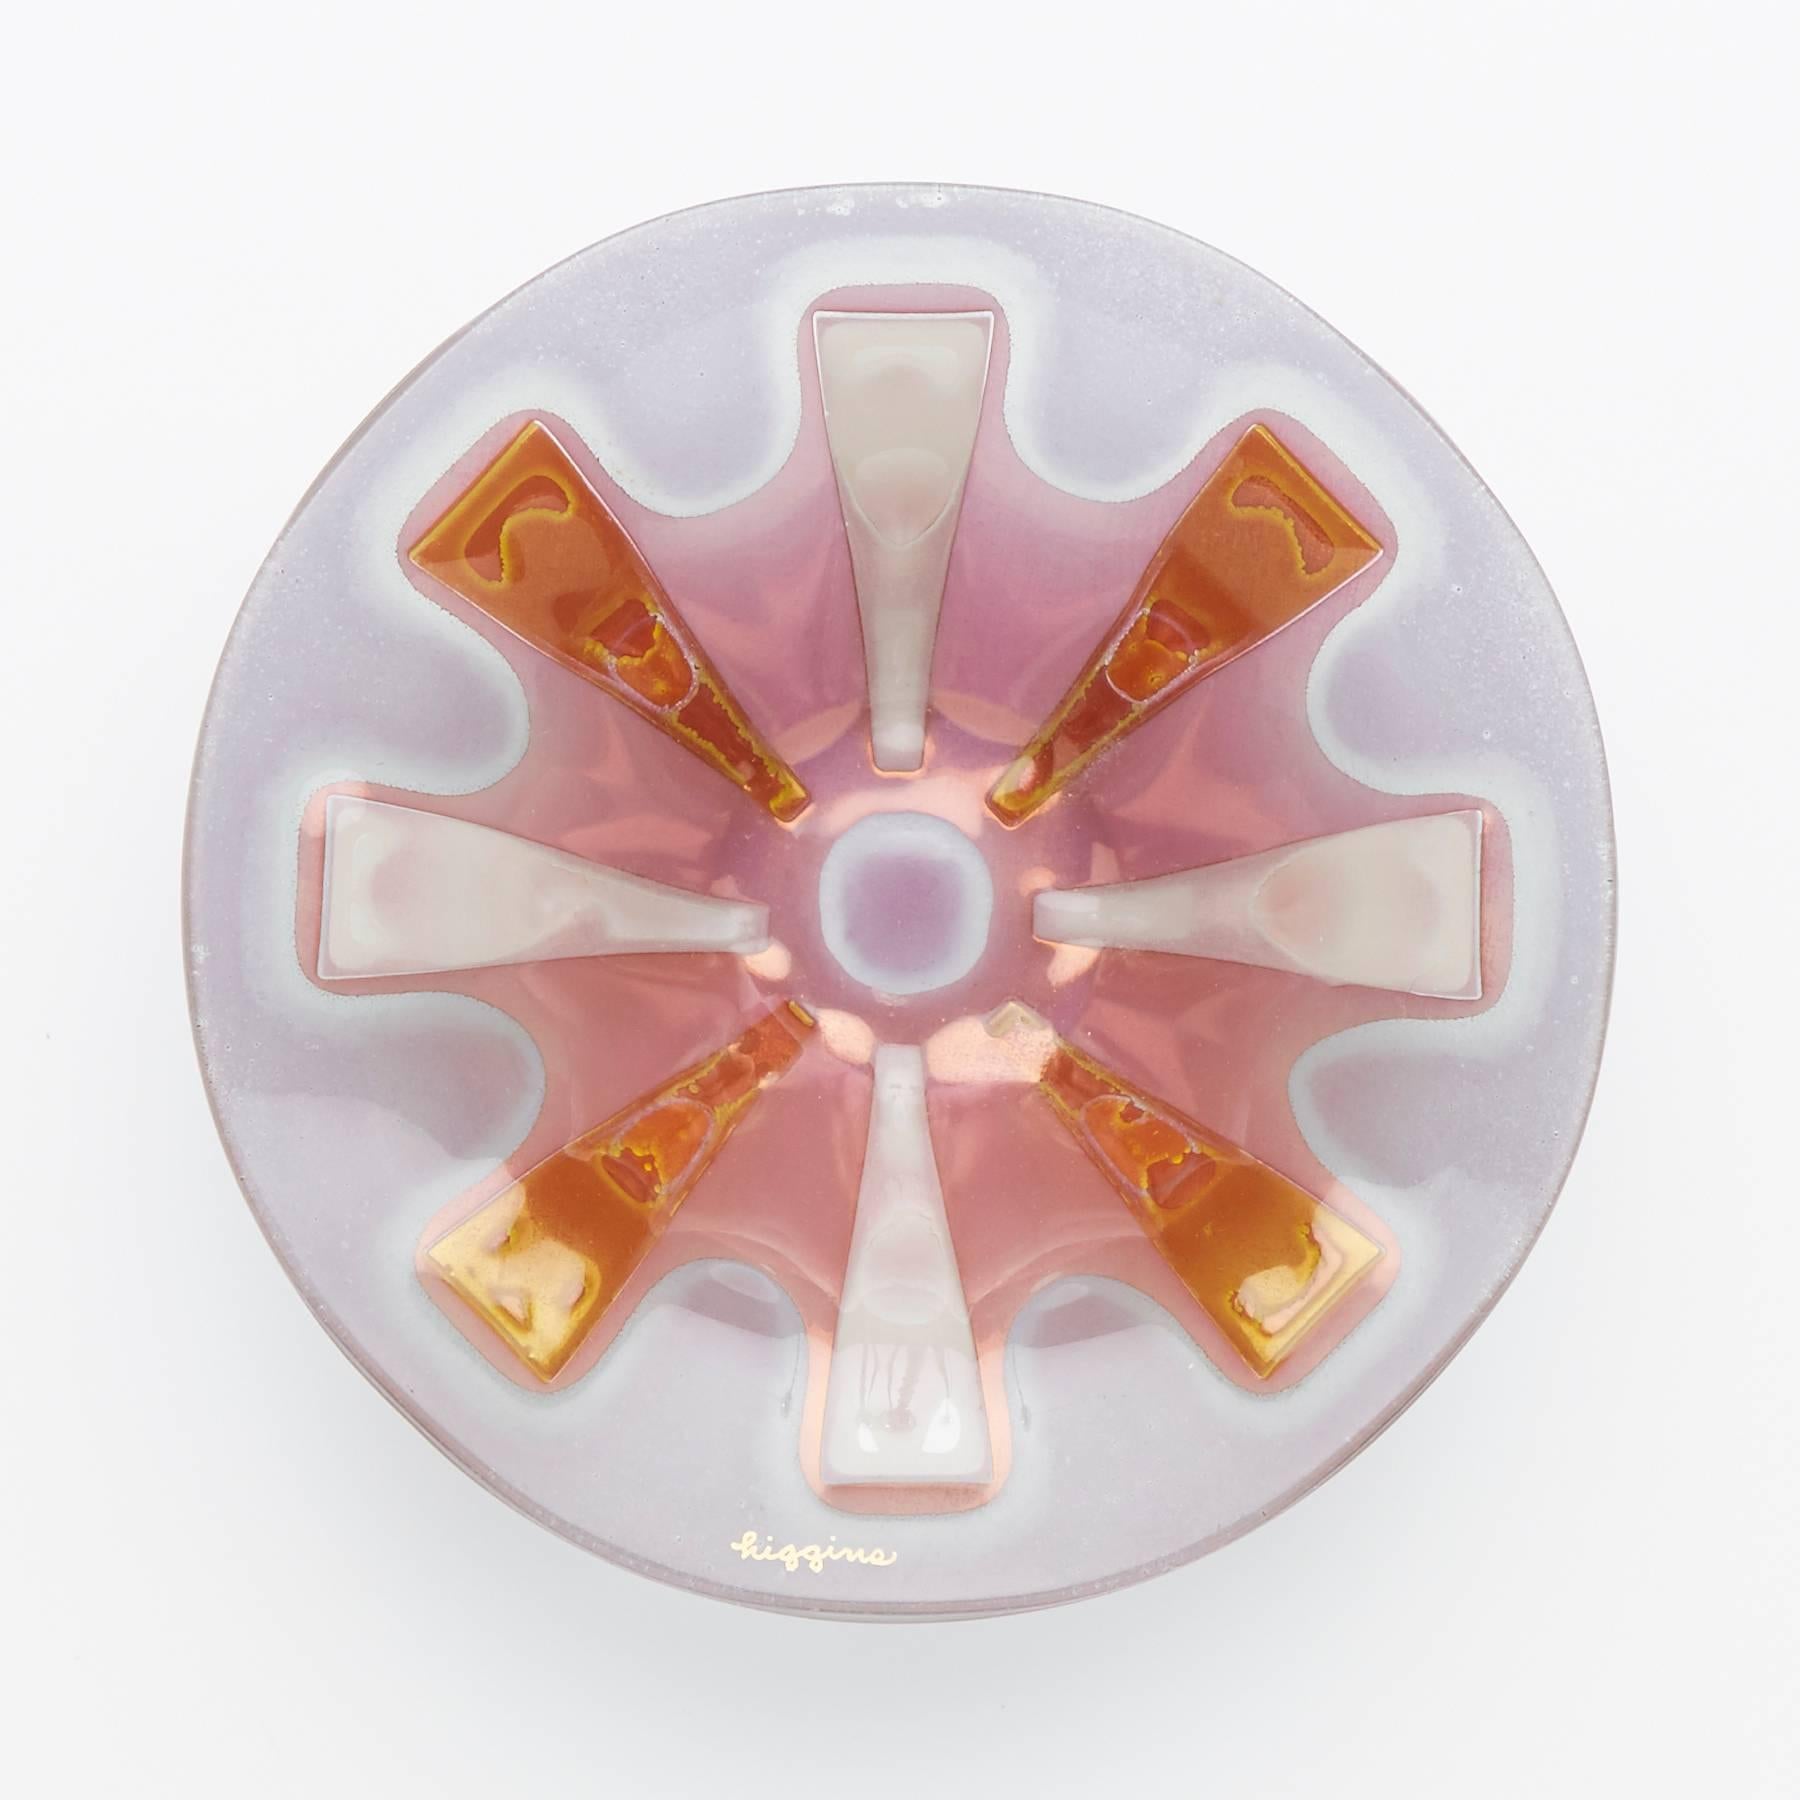 American Set of Three, Round Fused Glass Dishes by Higgins Studio, circa 1950